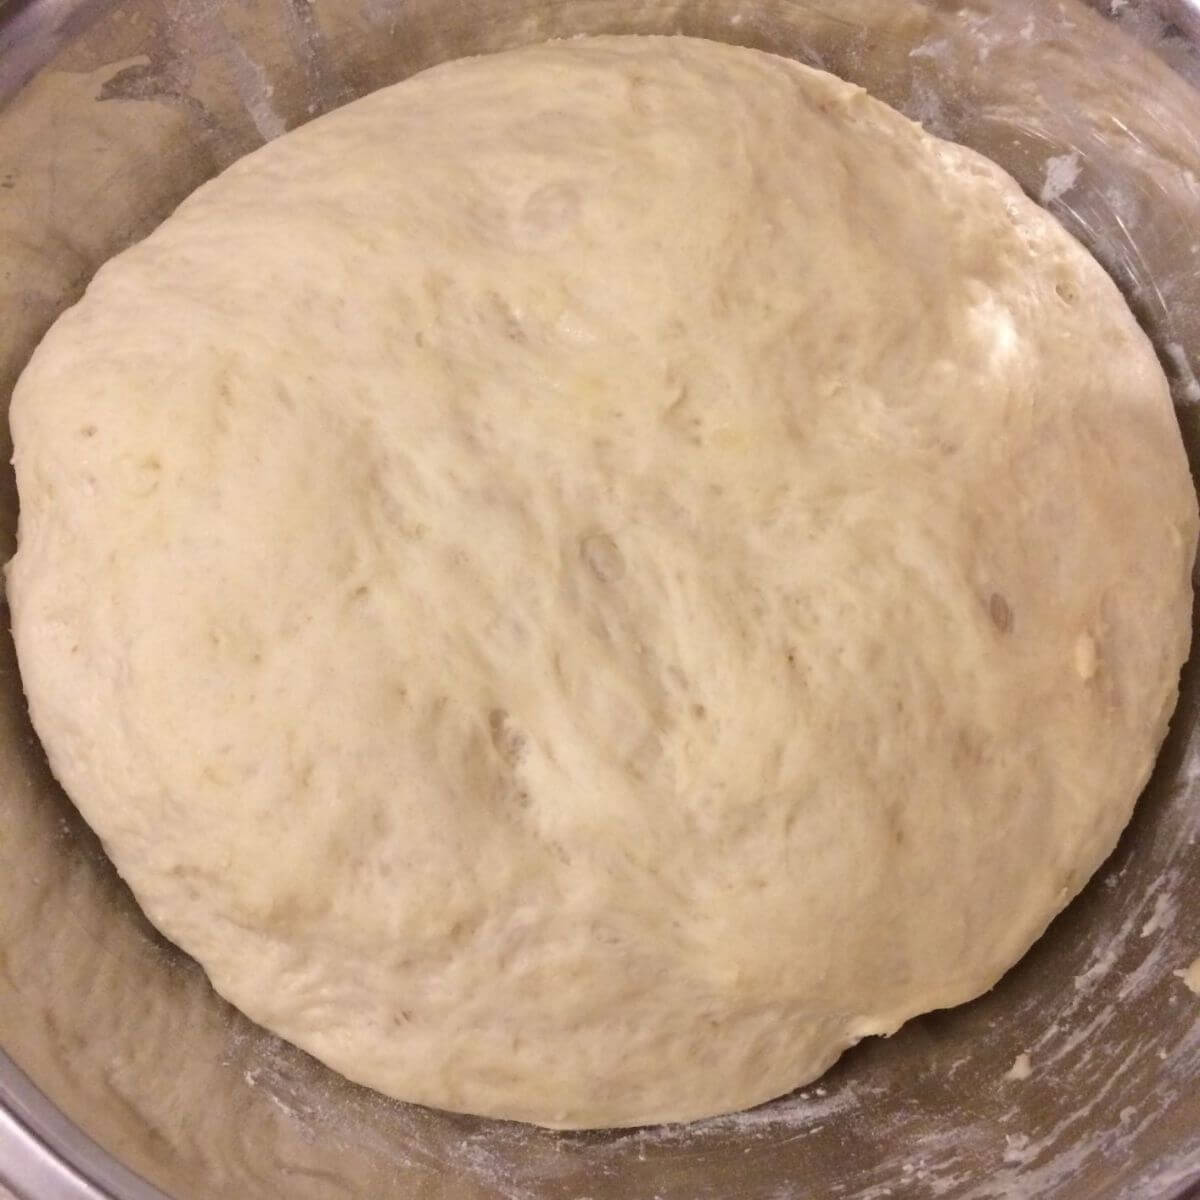 kraut burger dough in a stainless steel bowl